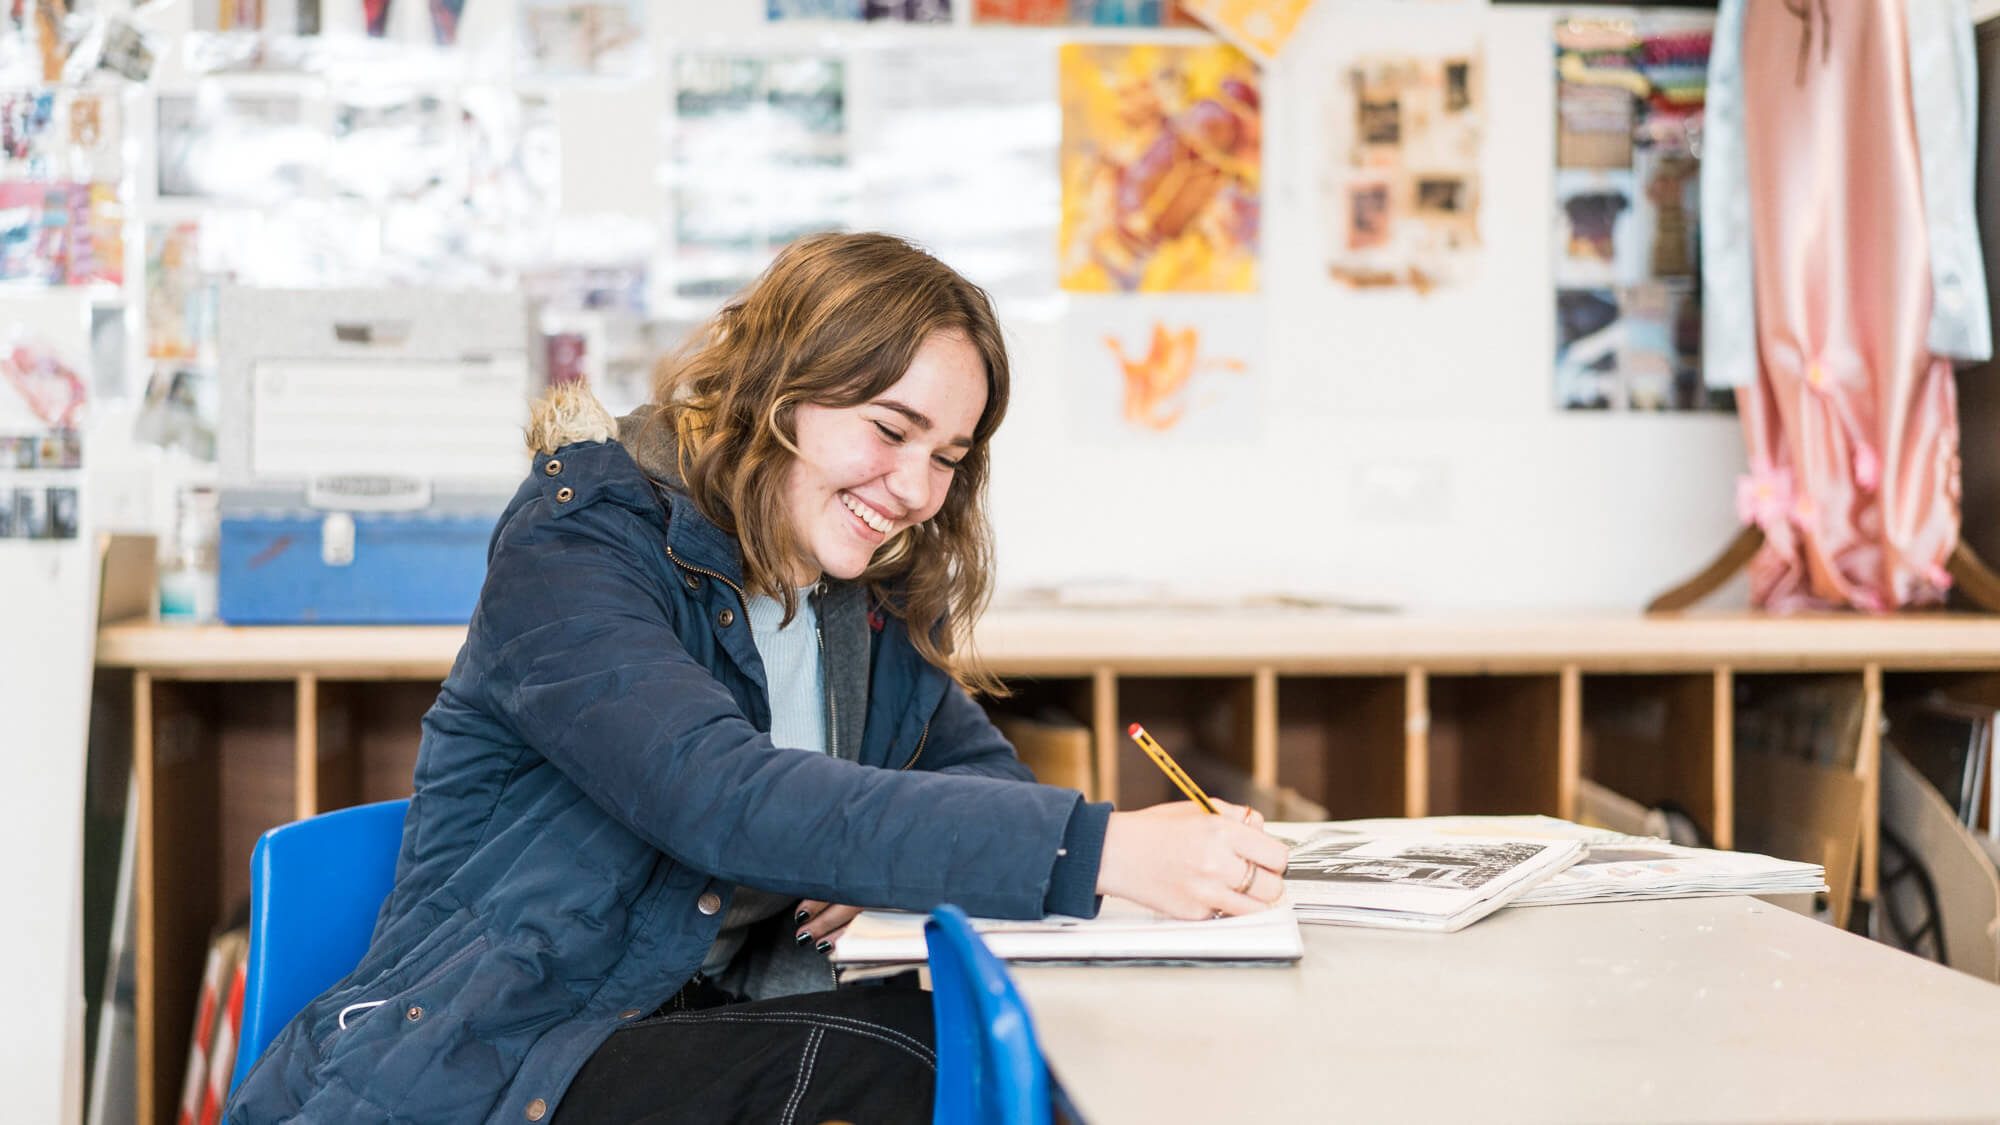 Female student sat at desk writing and smiling